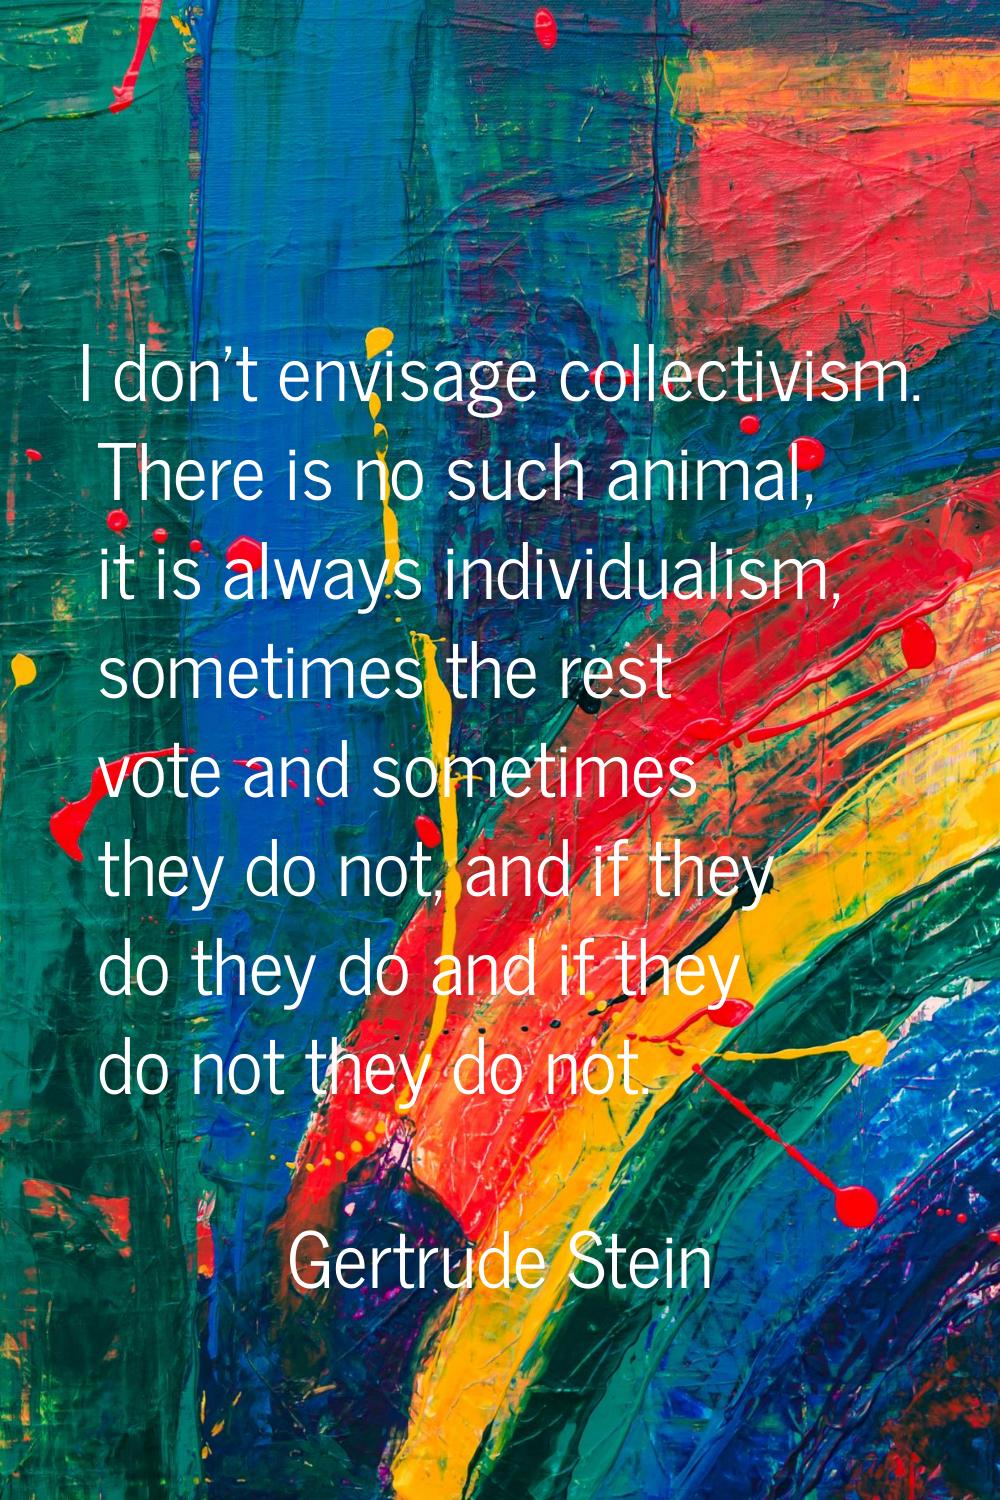 I don't envisage collectivism. There is no such animal, it is always individualism, sometimes the r